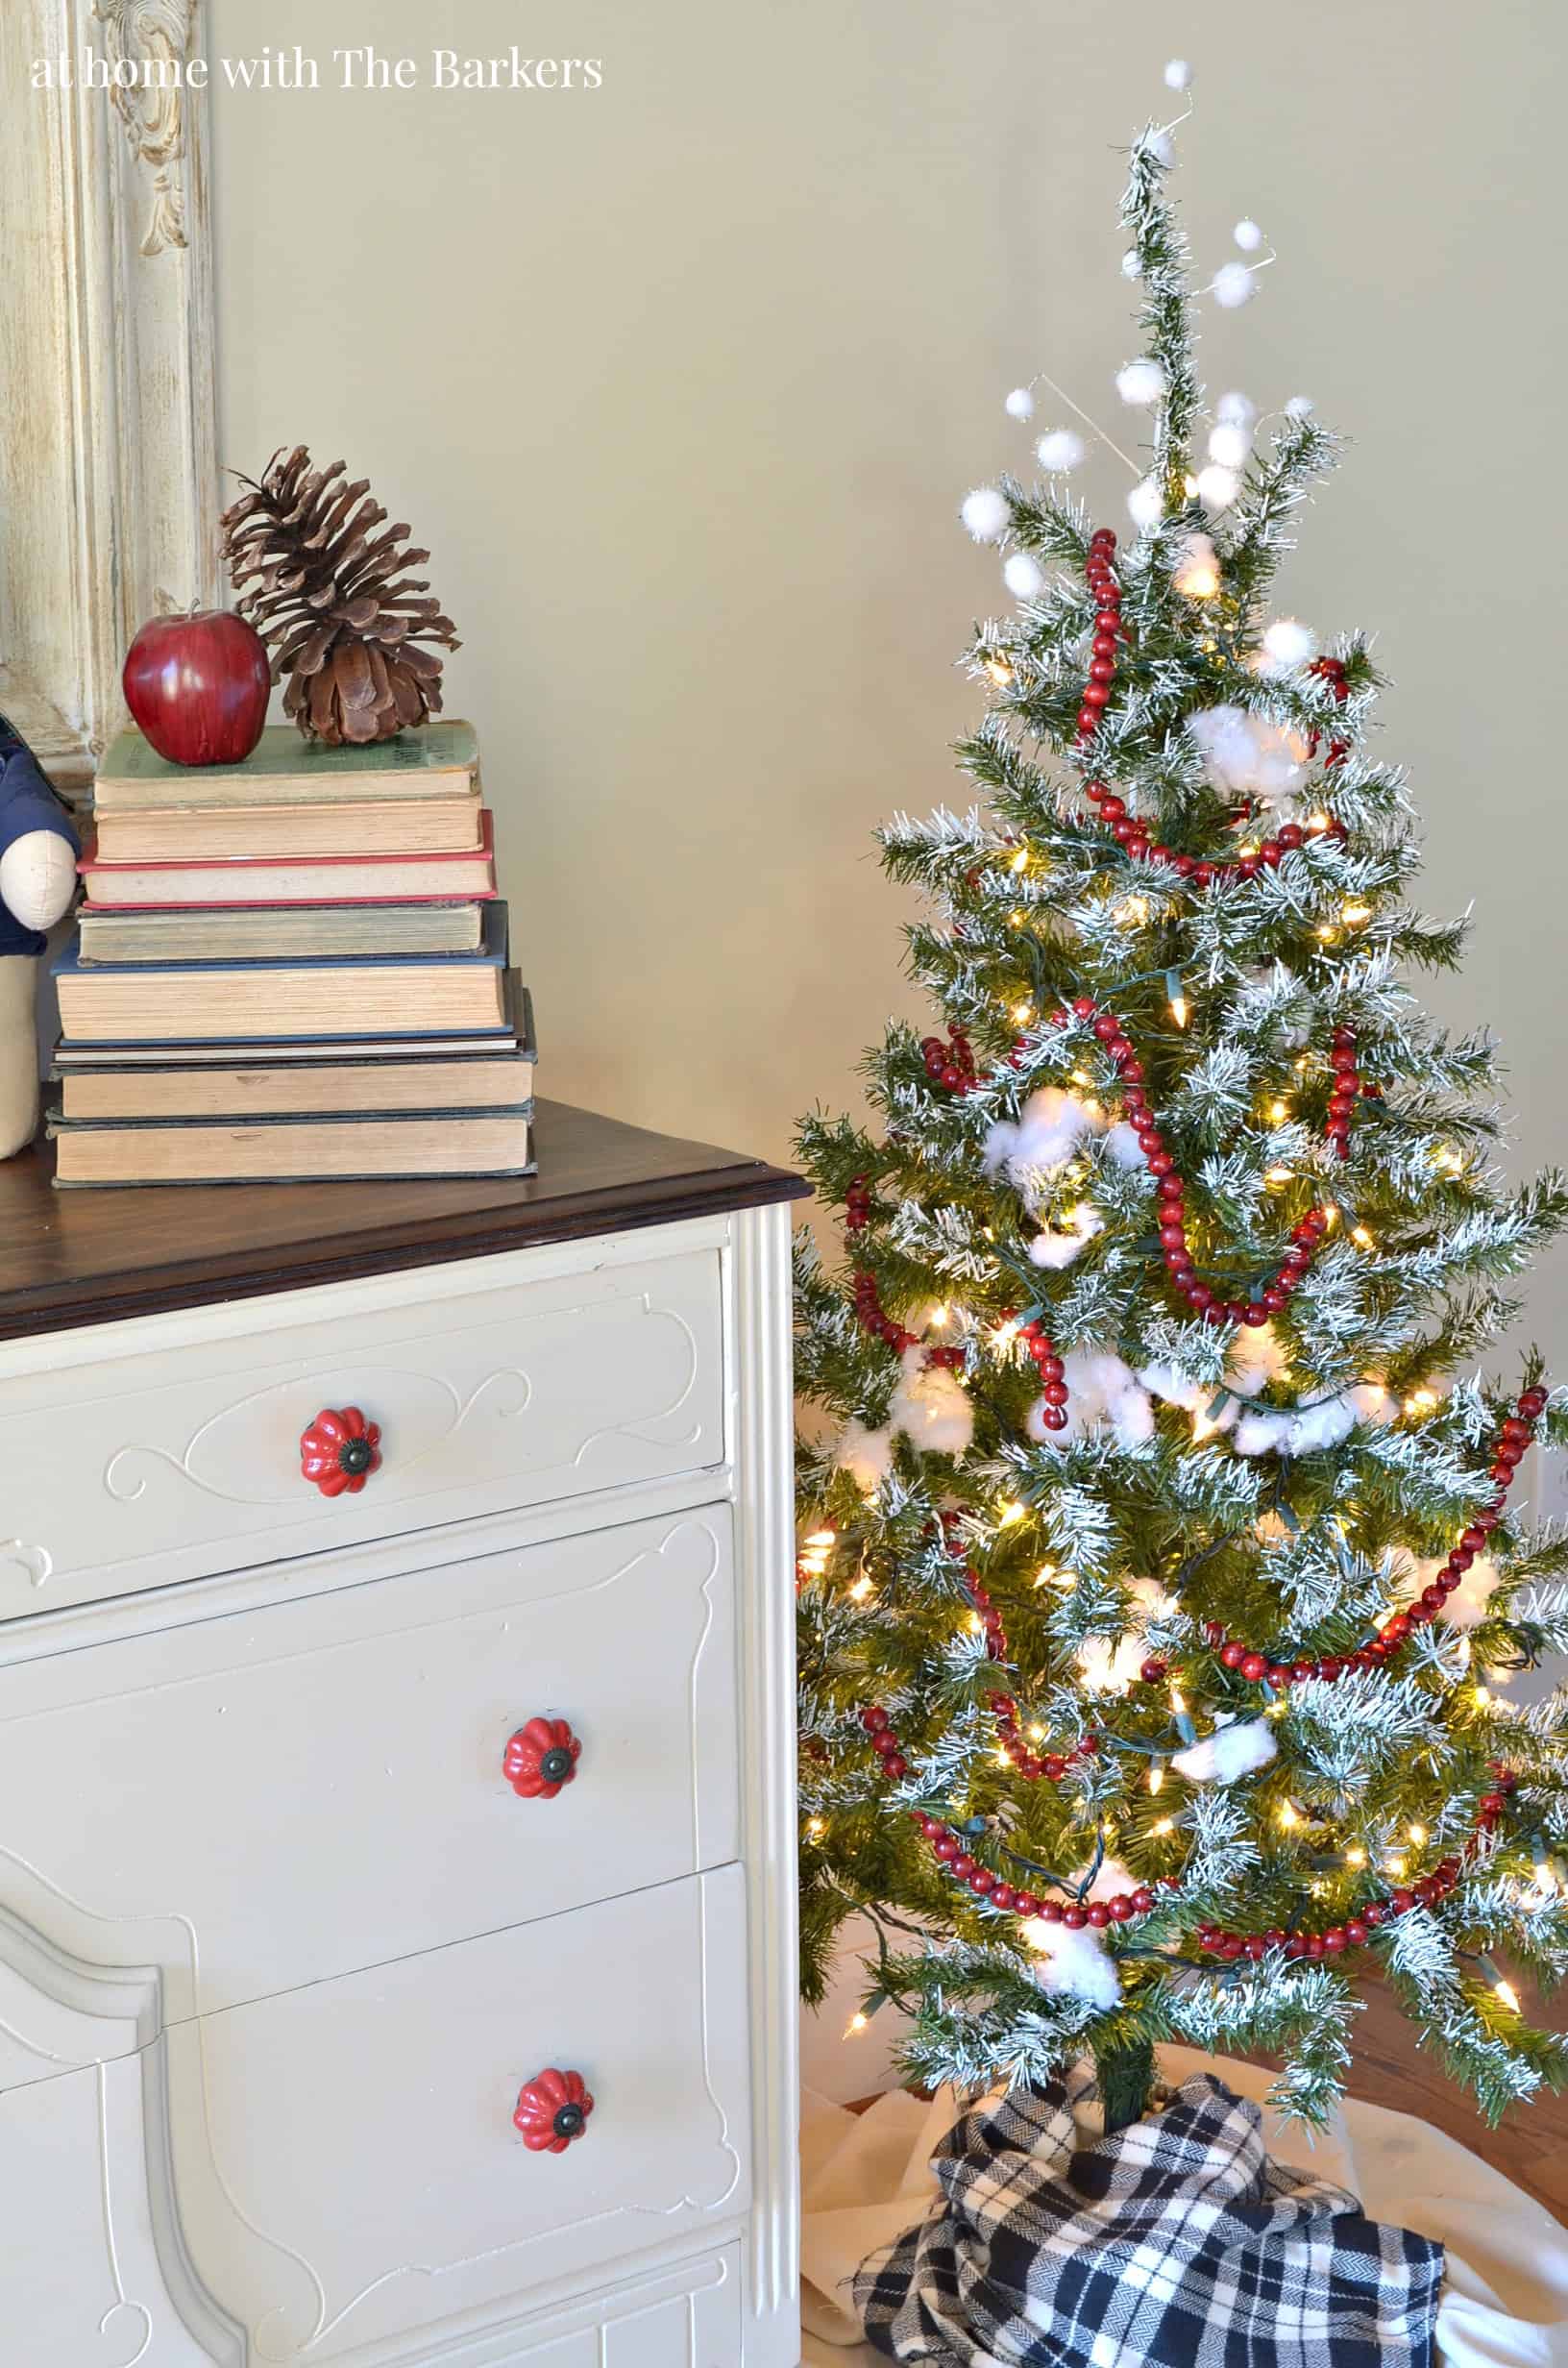 How to Flock a Christmas Tree for a Festive Snow-Covered Look